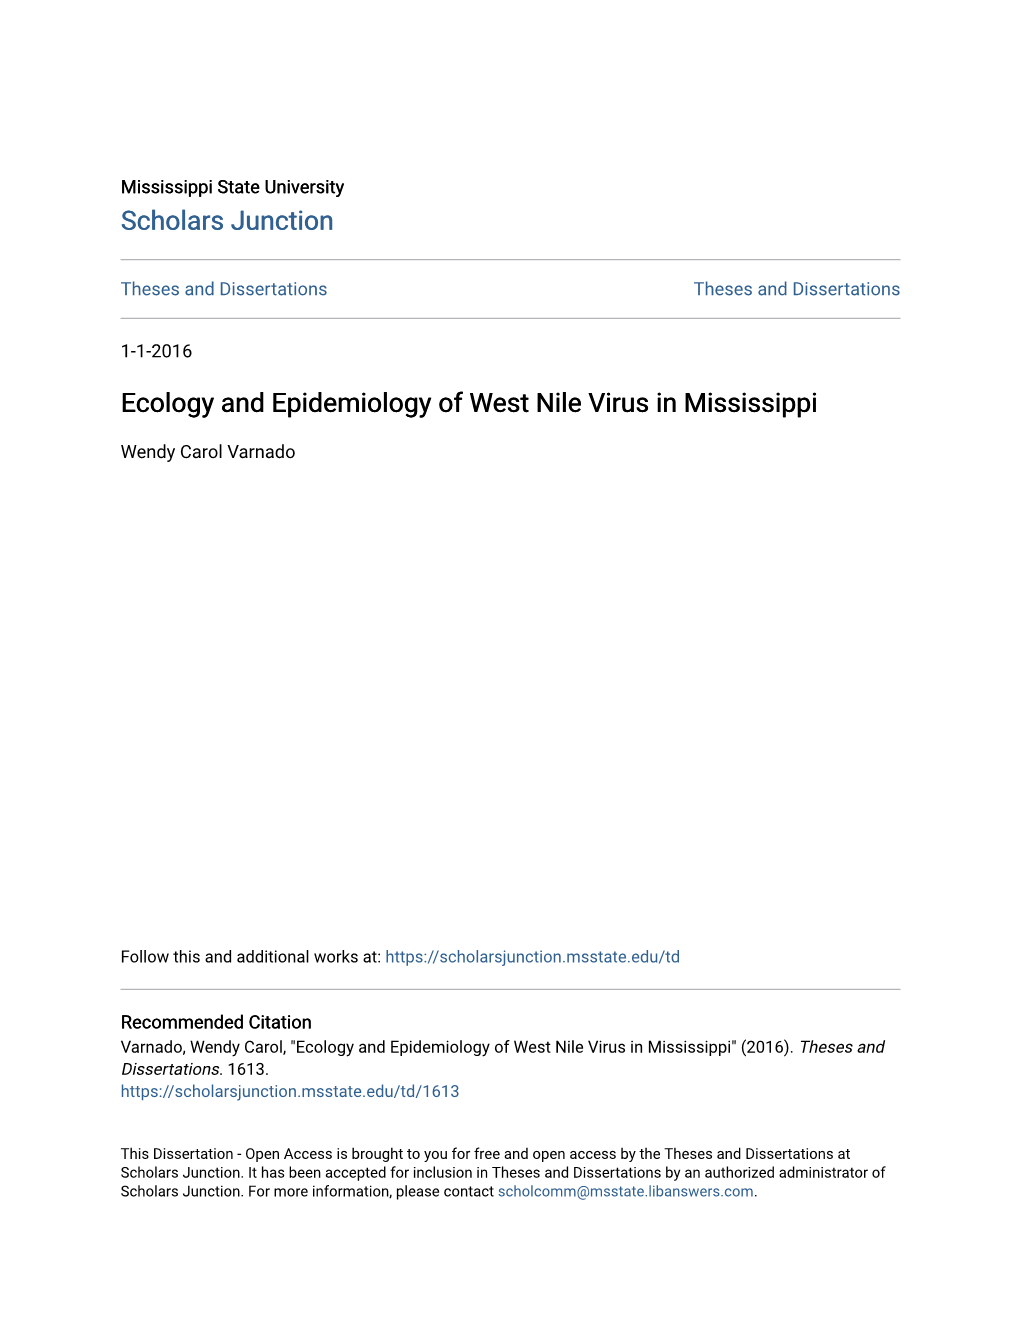 Ecology and Epidemiology of West Nile Virus in Mississippi